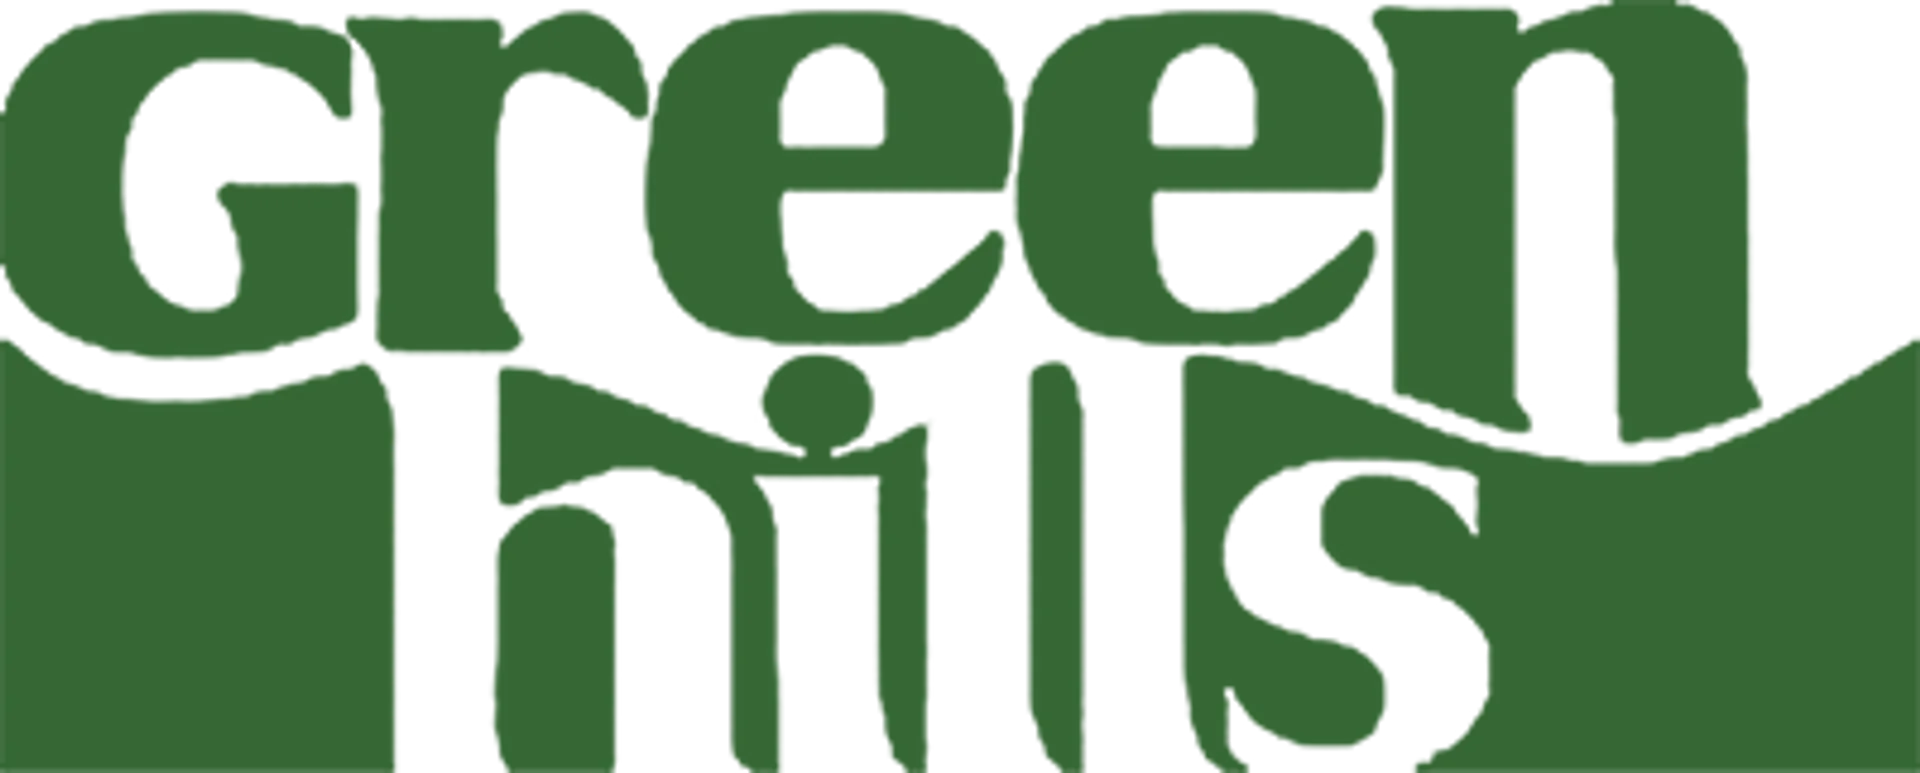 GREEN HILLS GROCERY logo current weekly ad